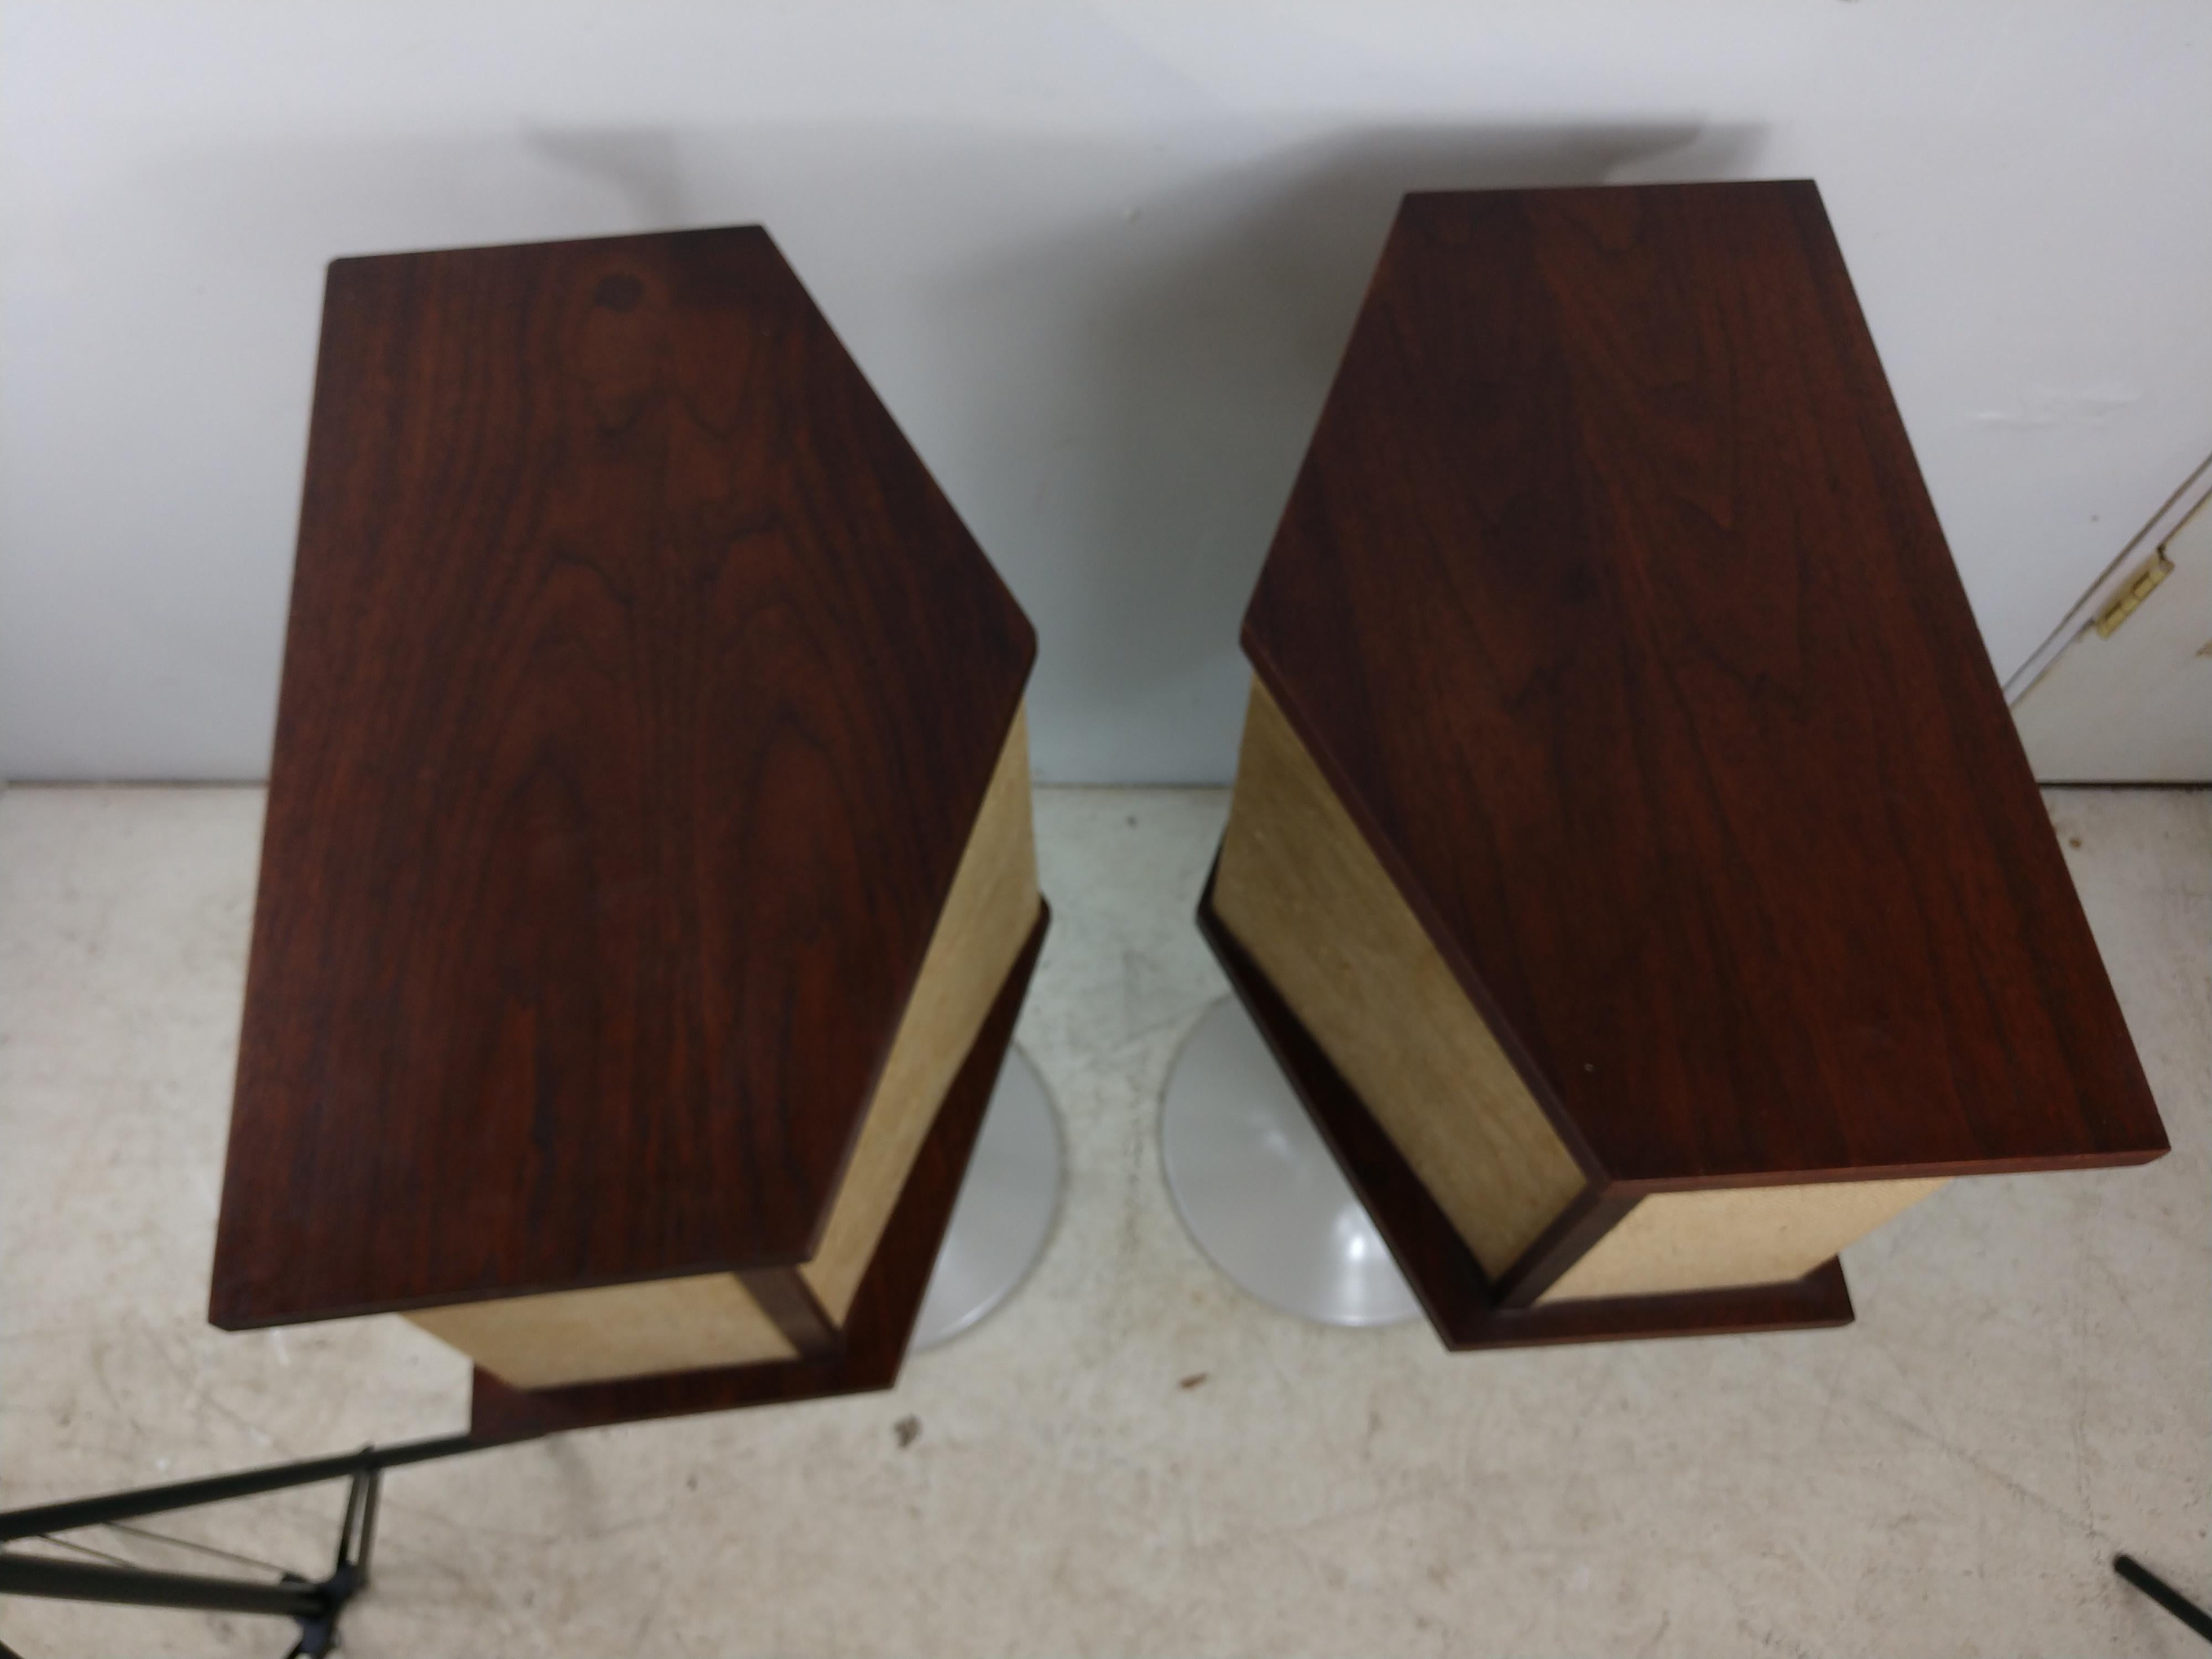 Fabulous pair of vintage, (1st year 1968) 901 speakers with tulip bases and with the equalizer and original typed instructions. Tulip bases have been restored, sanded and sprayed an almond color to match the fabric on the speakers. Cabinets are